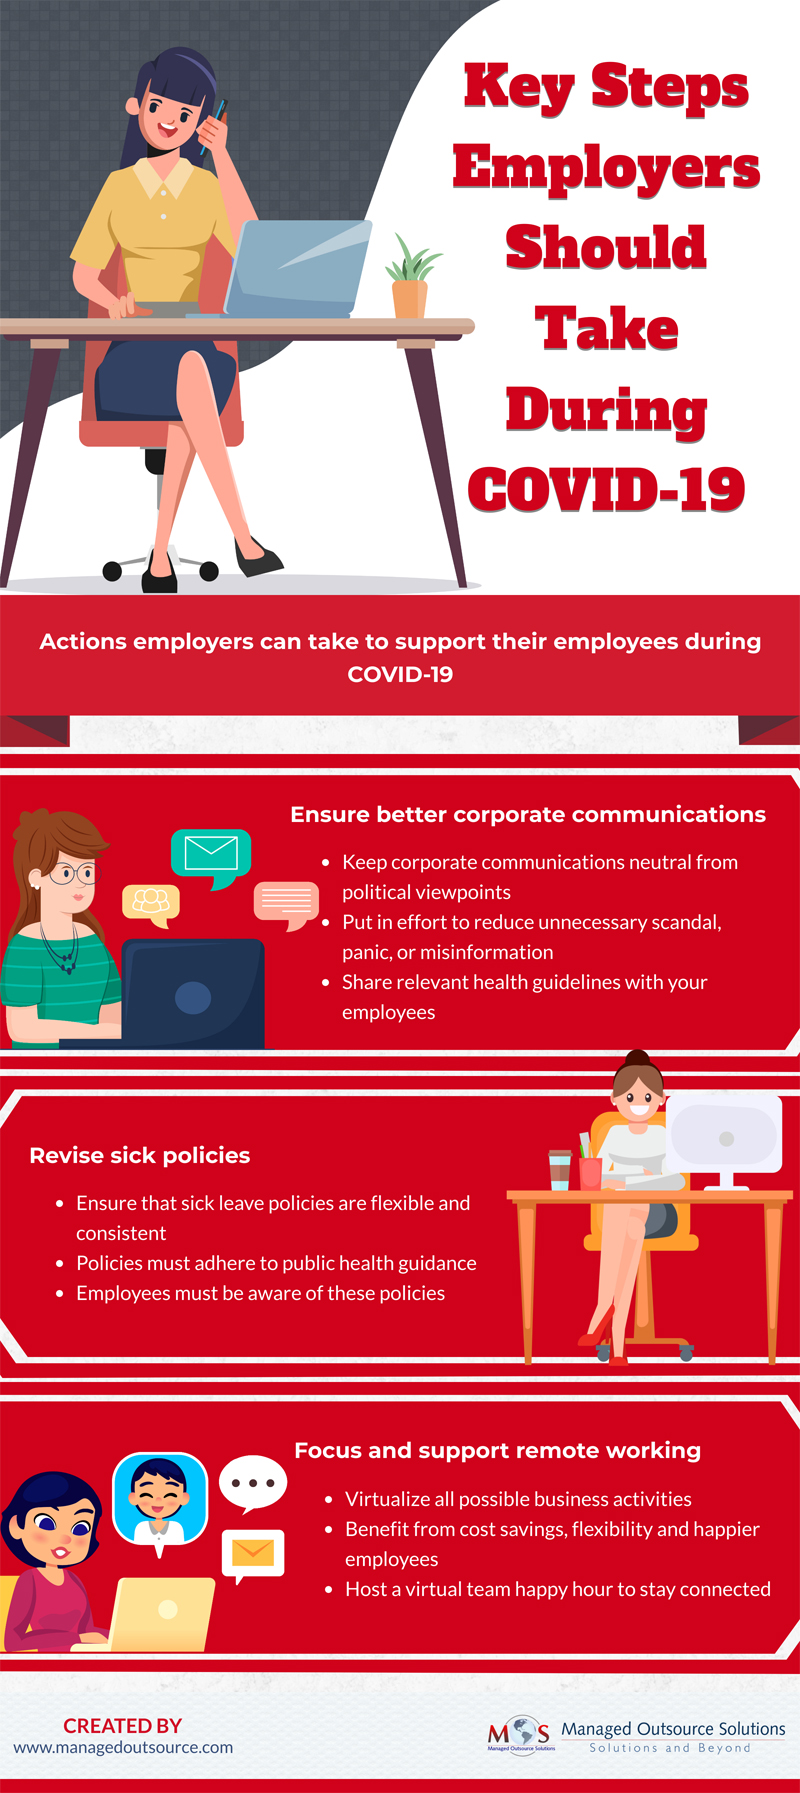 Steps Employers Should Take During COVID-19